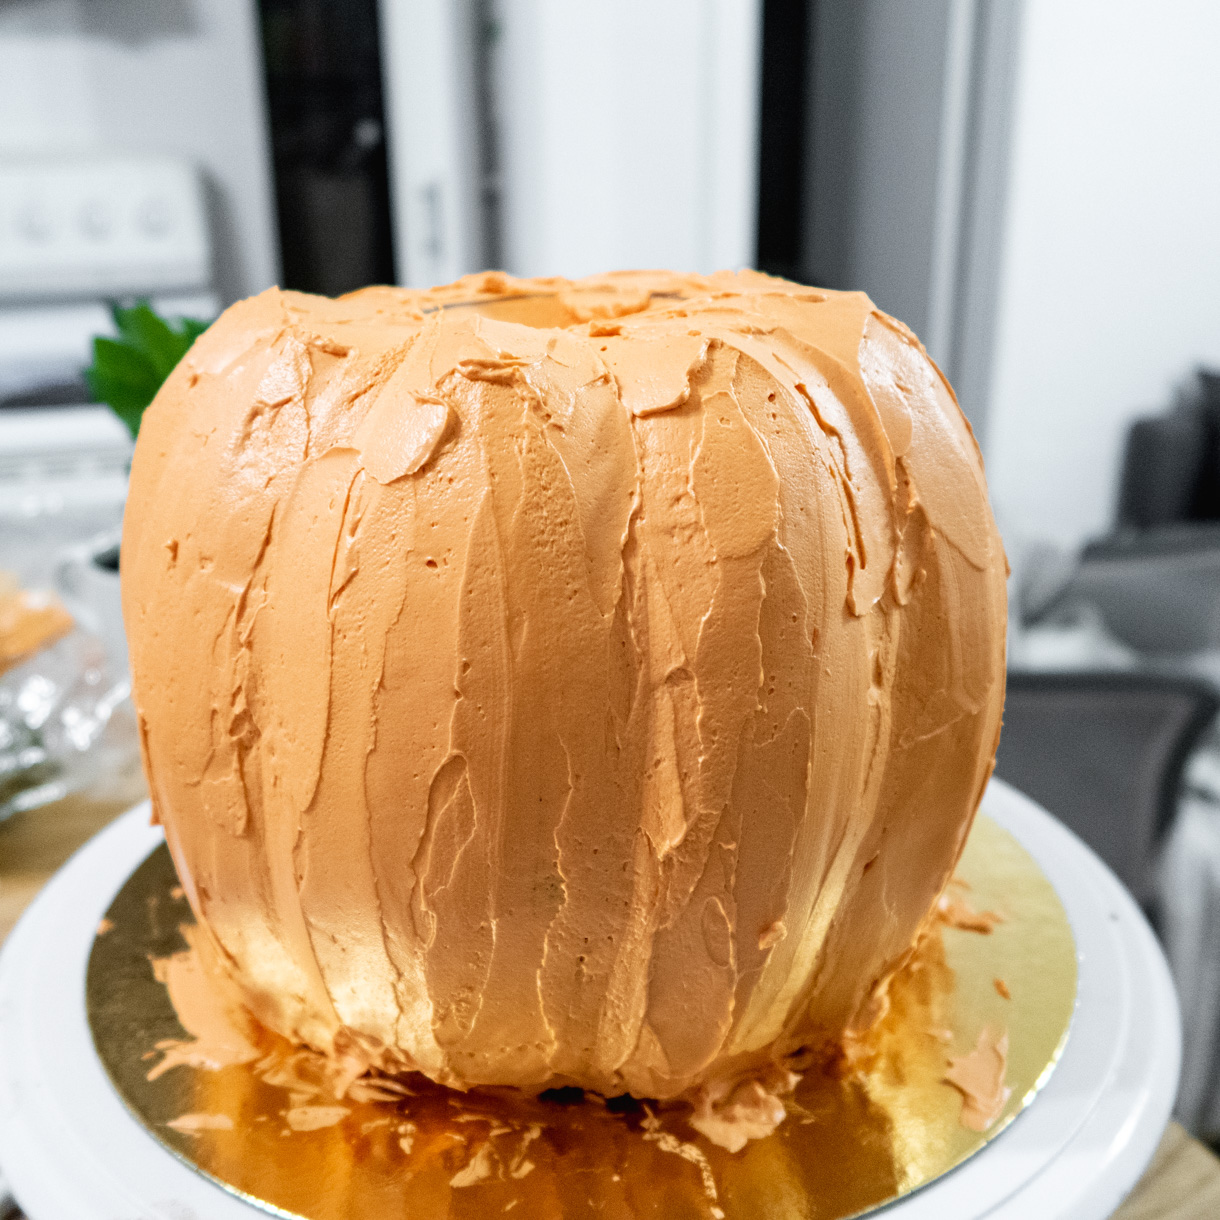 Smoothing out the buttercream while keeping the pumpkin segments.